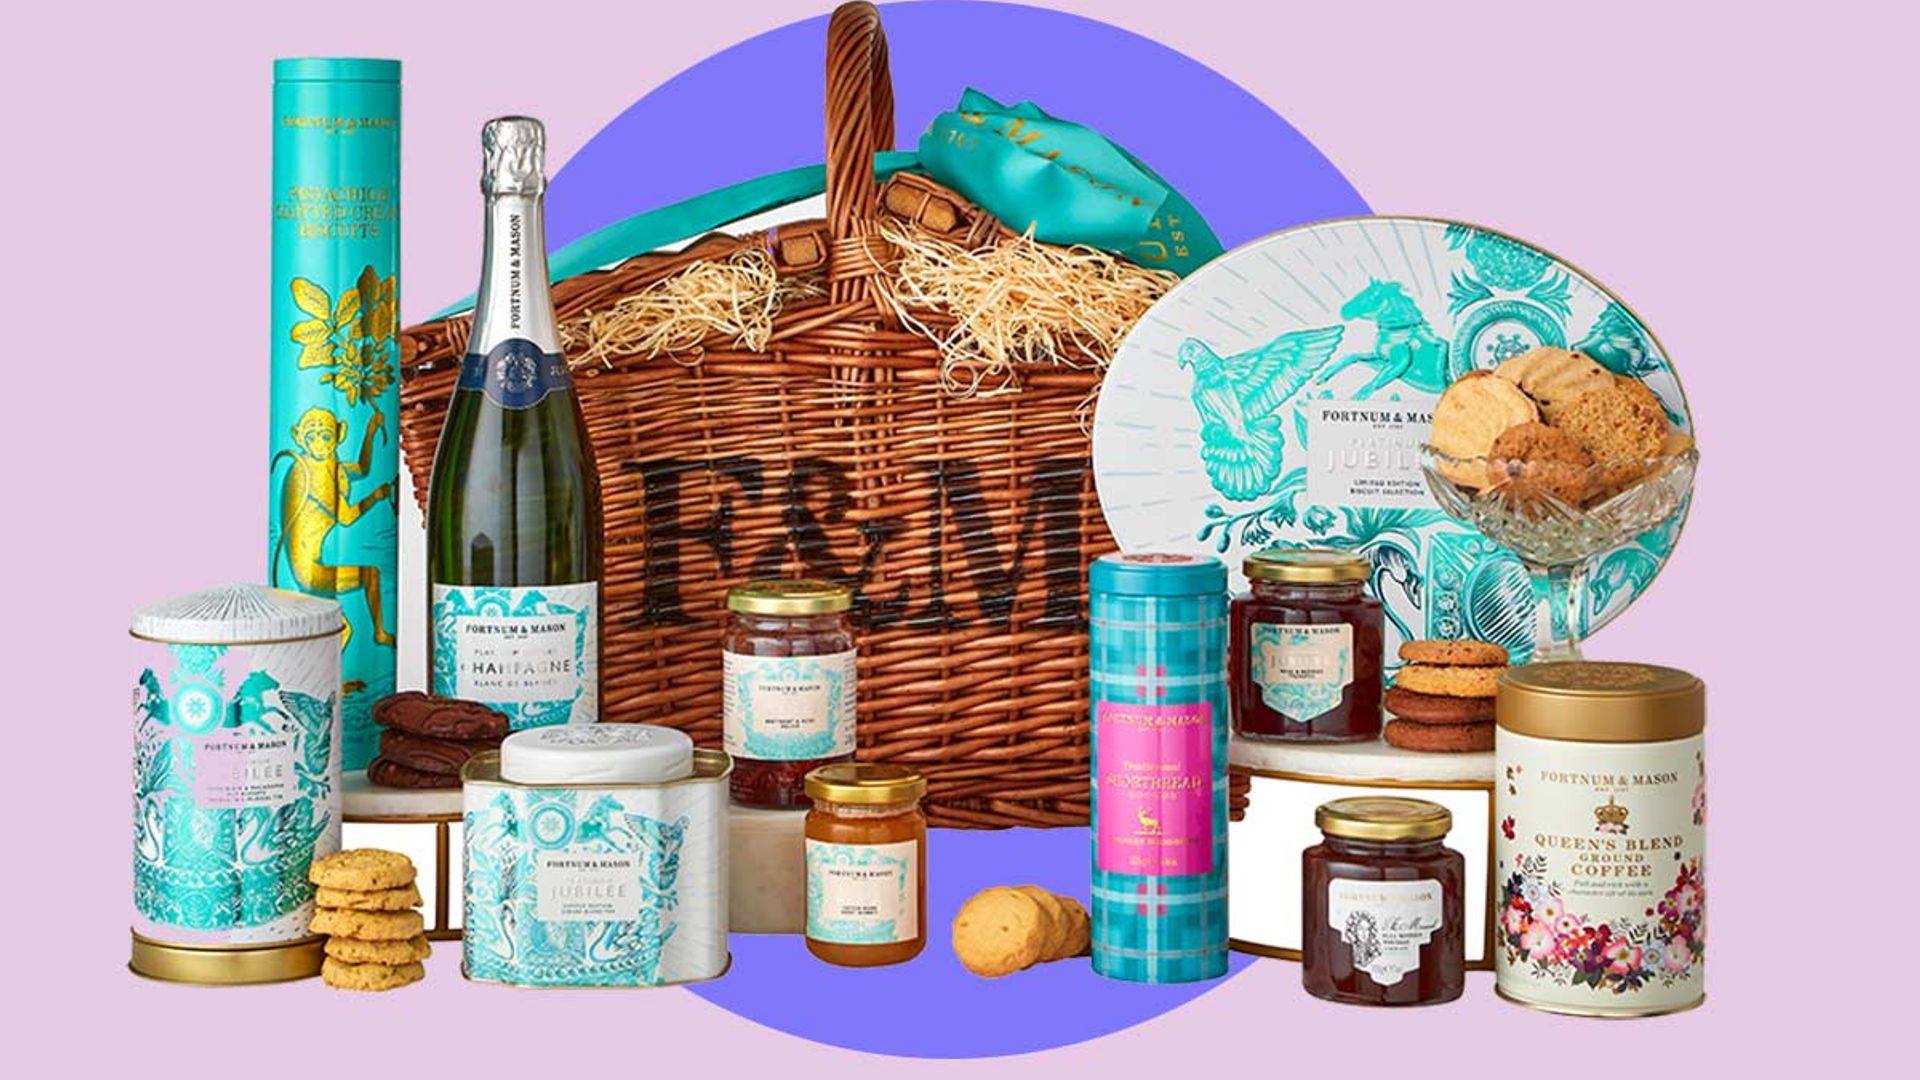 Best Queen's Jubilee hampers to celebrate in style this summer